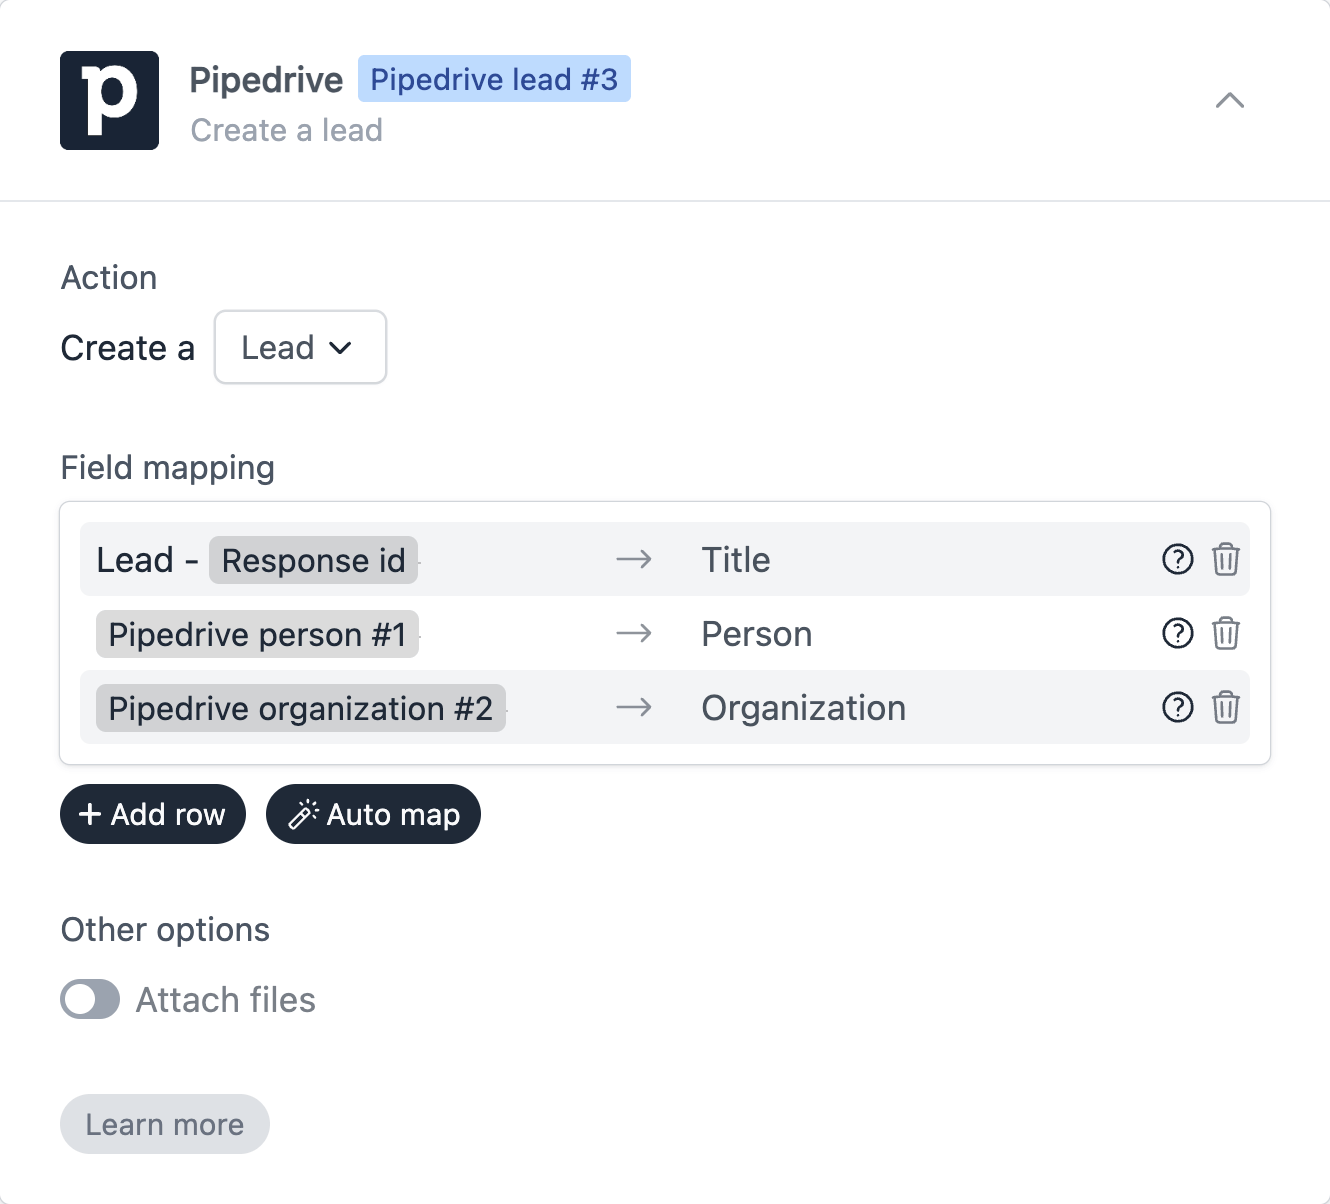 Pipedrive new lead workflow